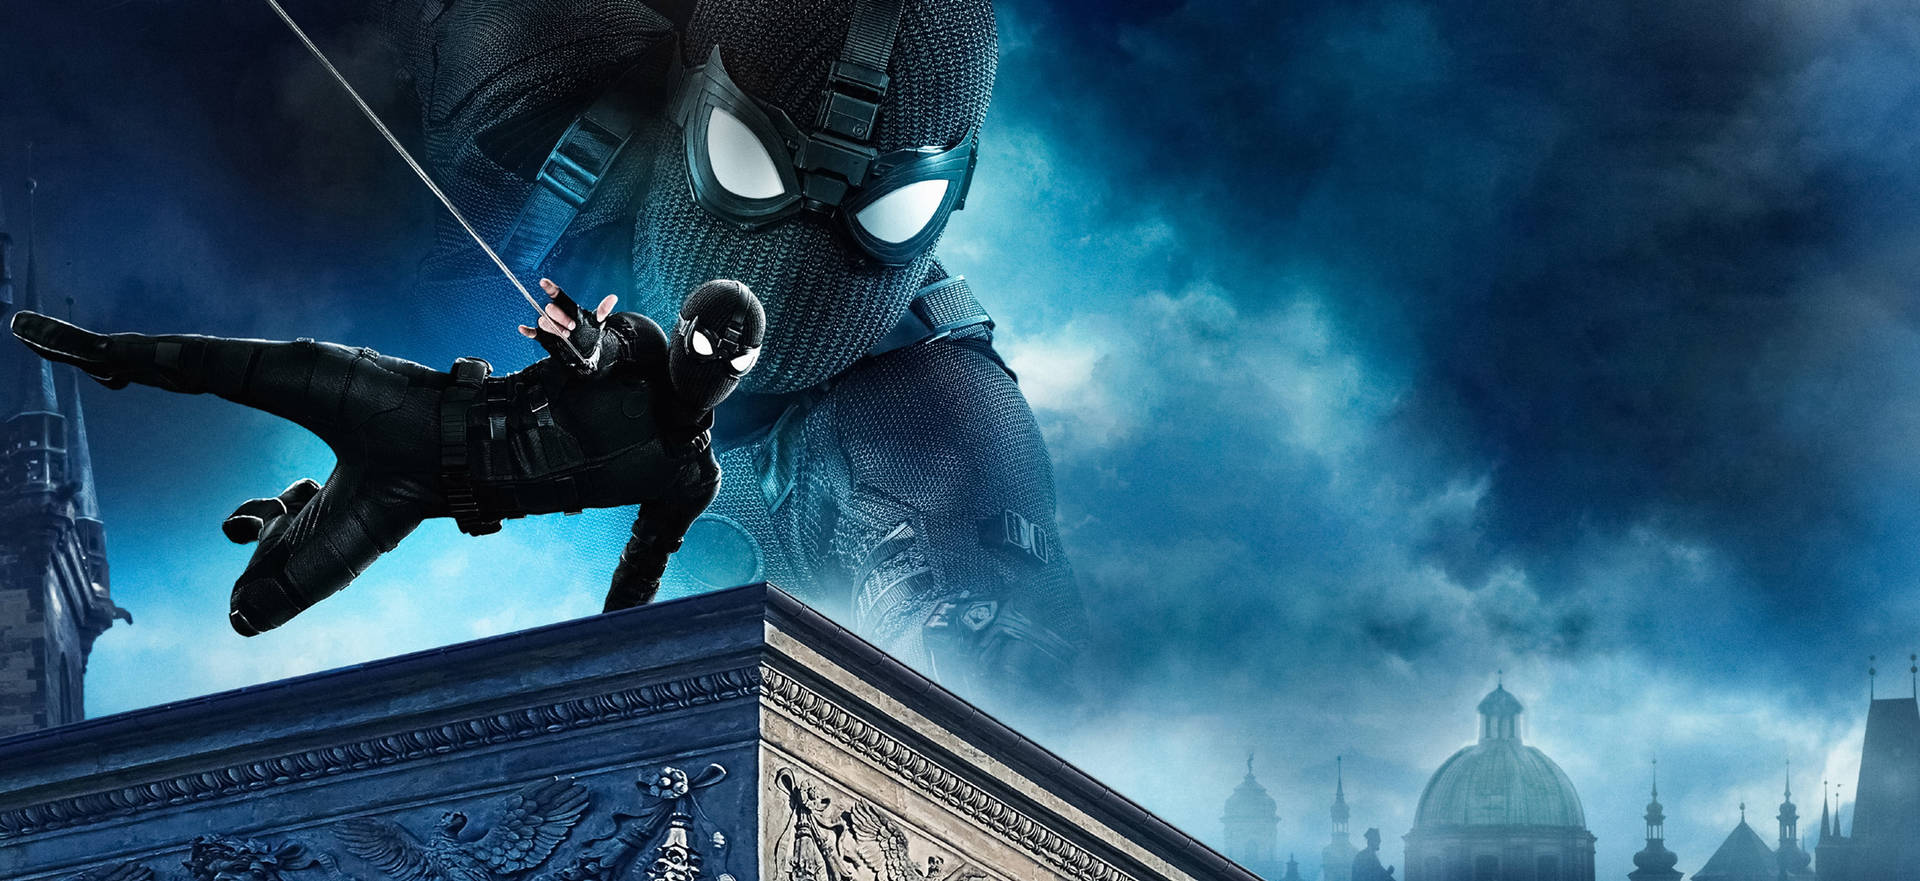 Cloudy Blue Spider Man Far From Home 2019 Background